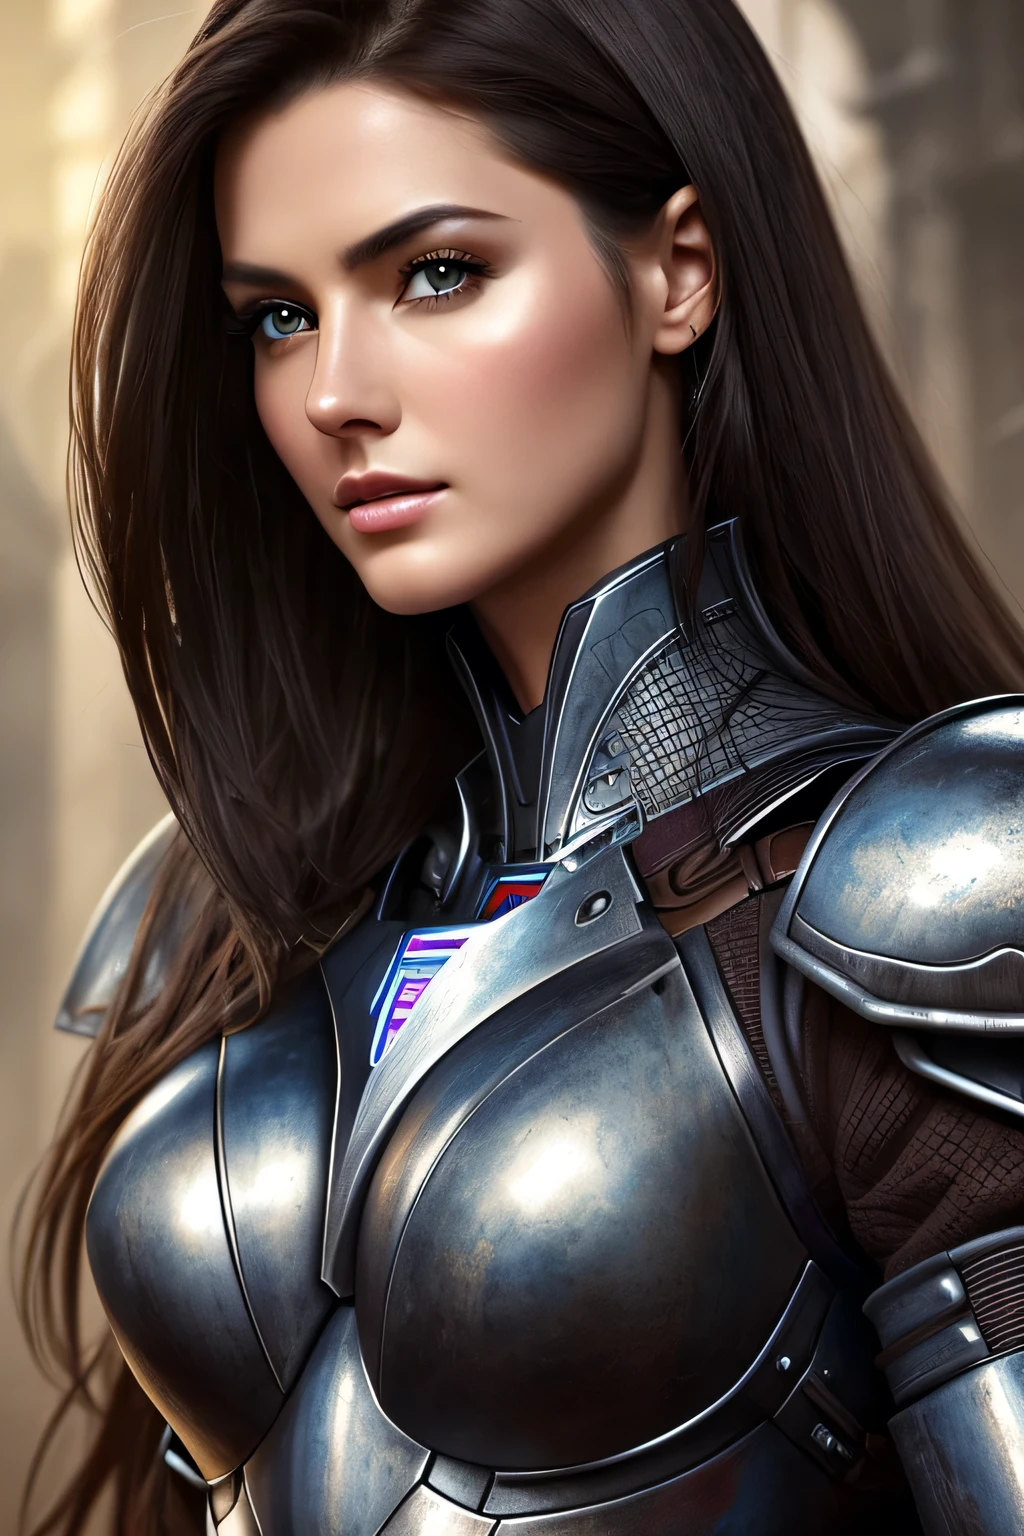 Tall beautiful woman with dark hair wearing highly realistic and detailed robotic armor, Upper body portrait、masterpiece, 最high quality, high quality, High resolution, Face close-up､
